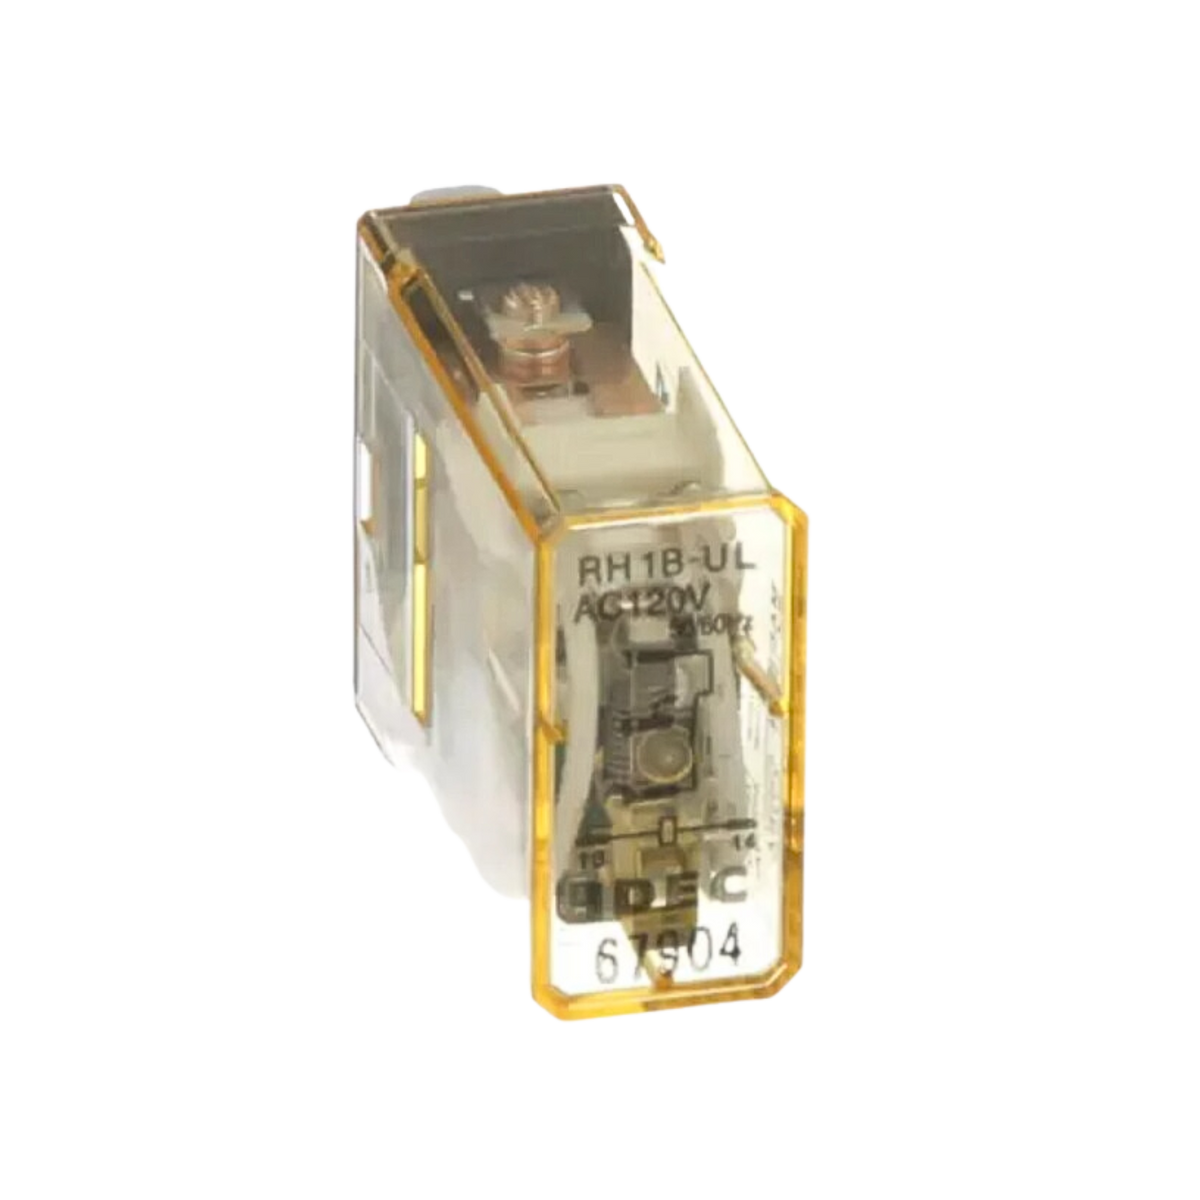 Plug-In Relay | RH1B-ULAC120V used on Idec product line - front view